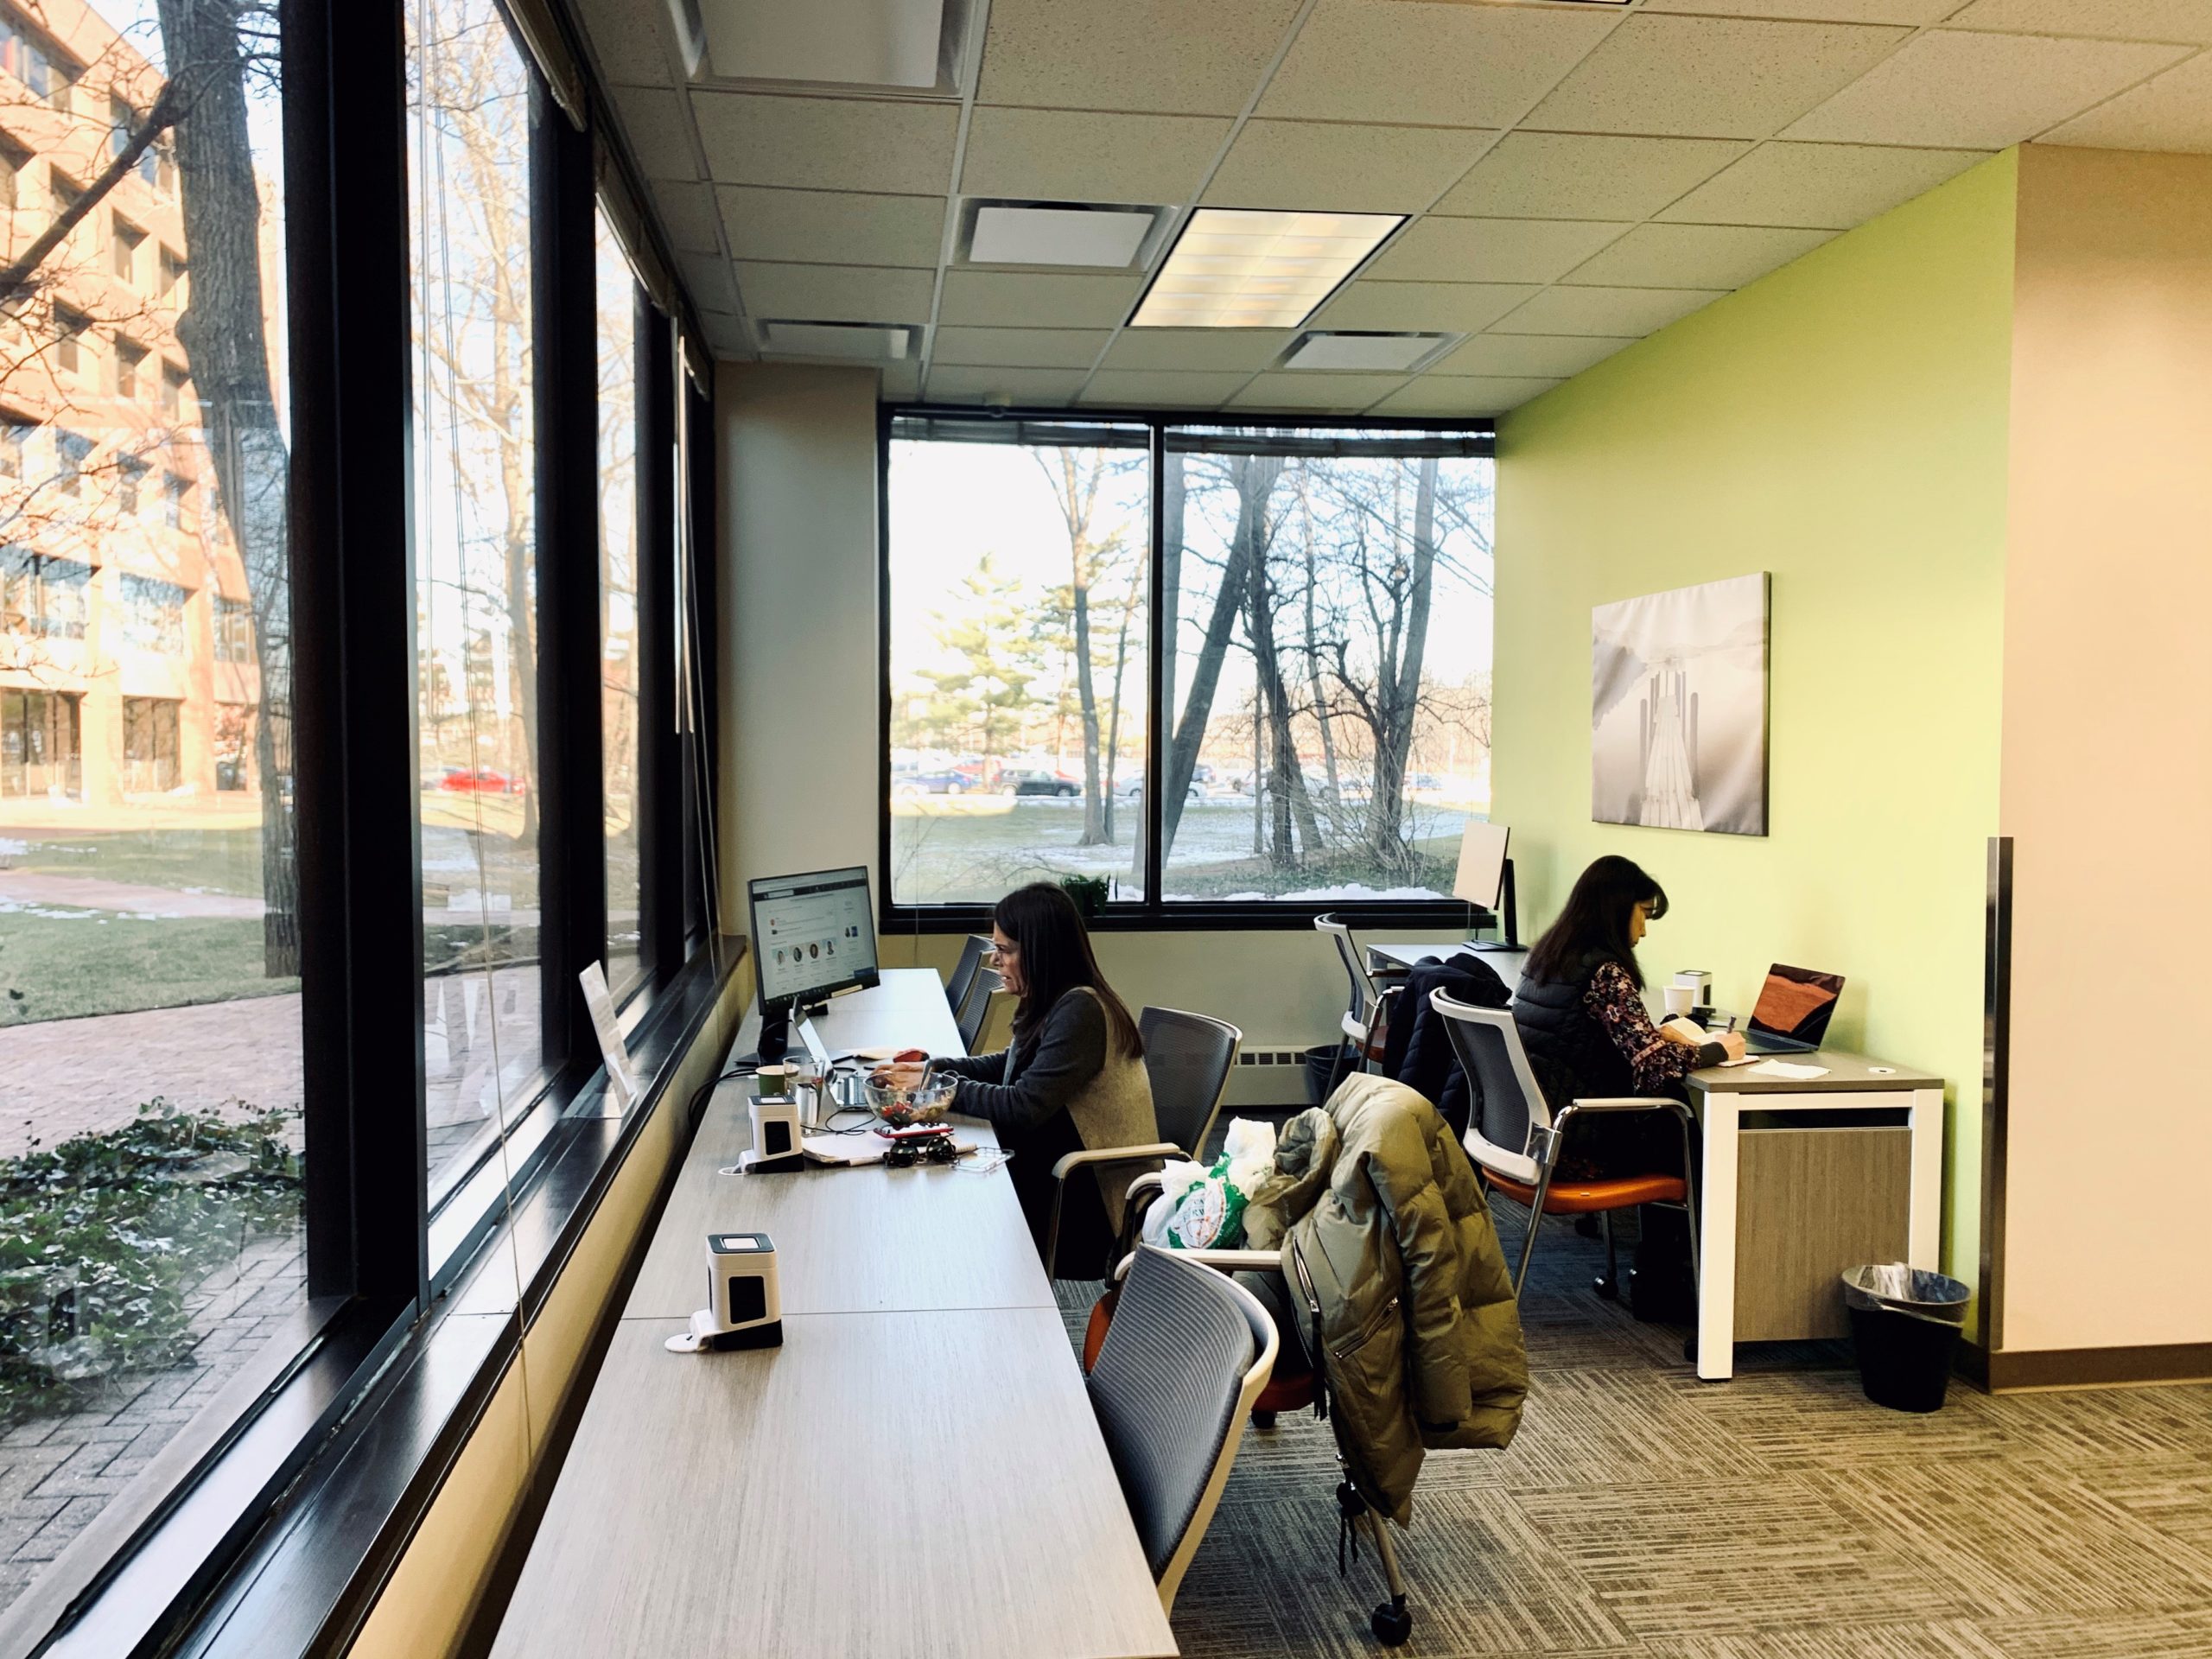 A Coworking Space Near Me Oradell nj-1